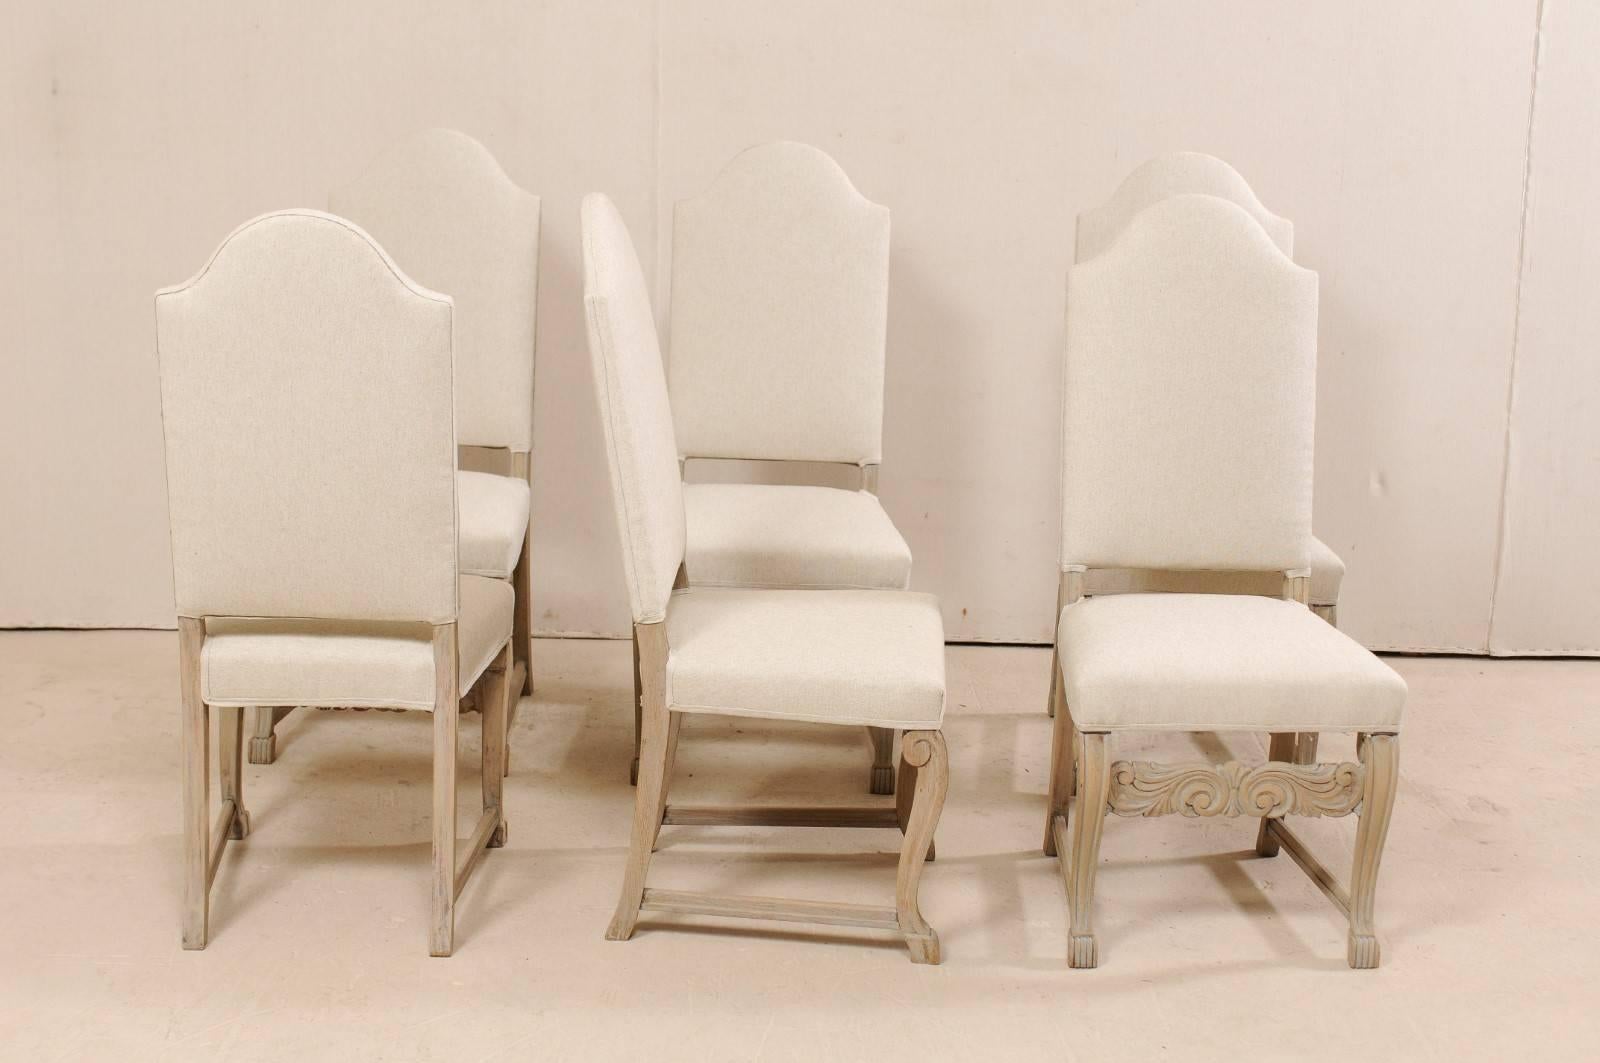 A Swedish Set of 6 Upholstered & Wood Dining Side Chairs w/Arched Top-rail Backs 1